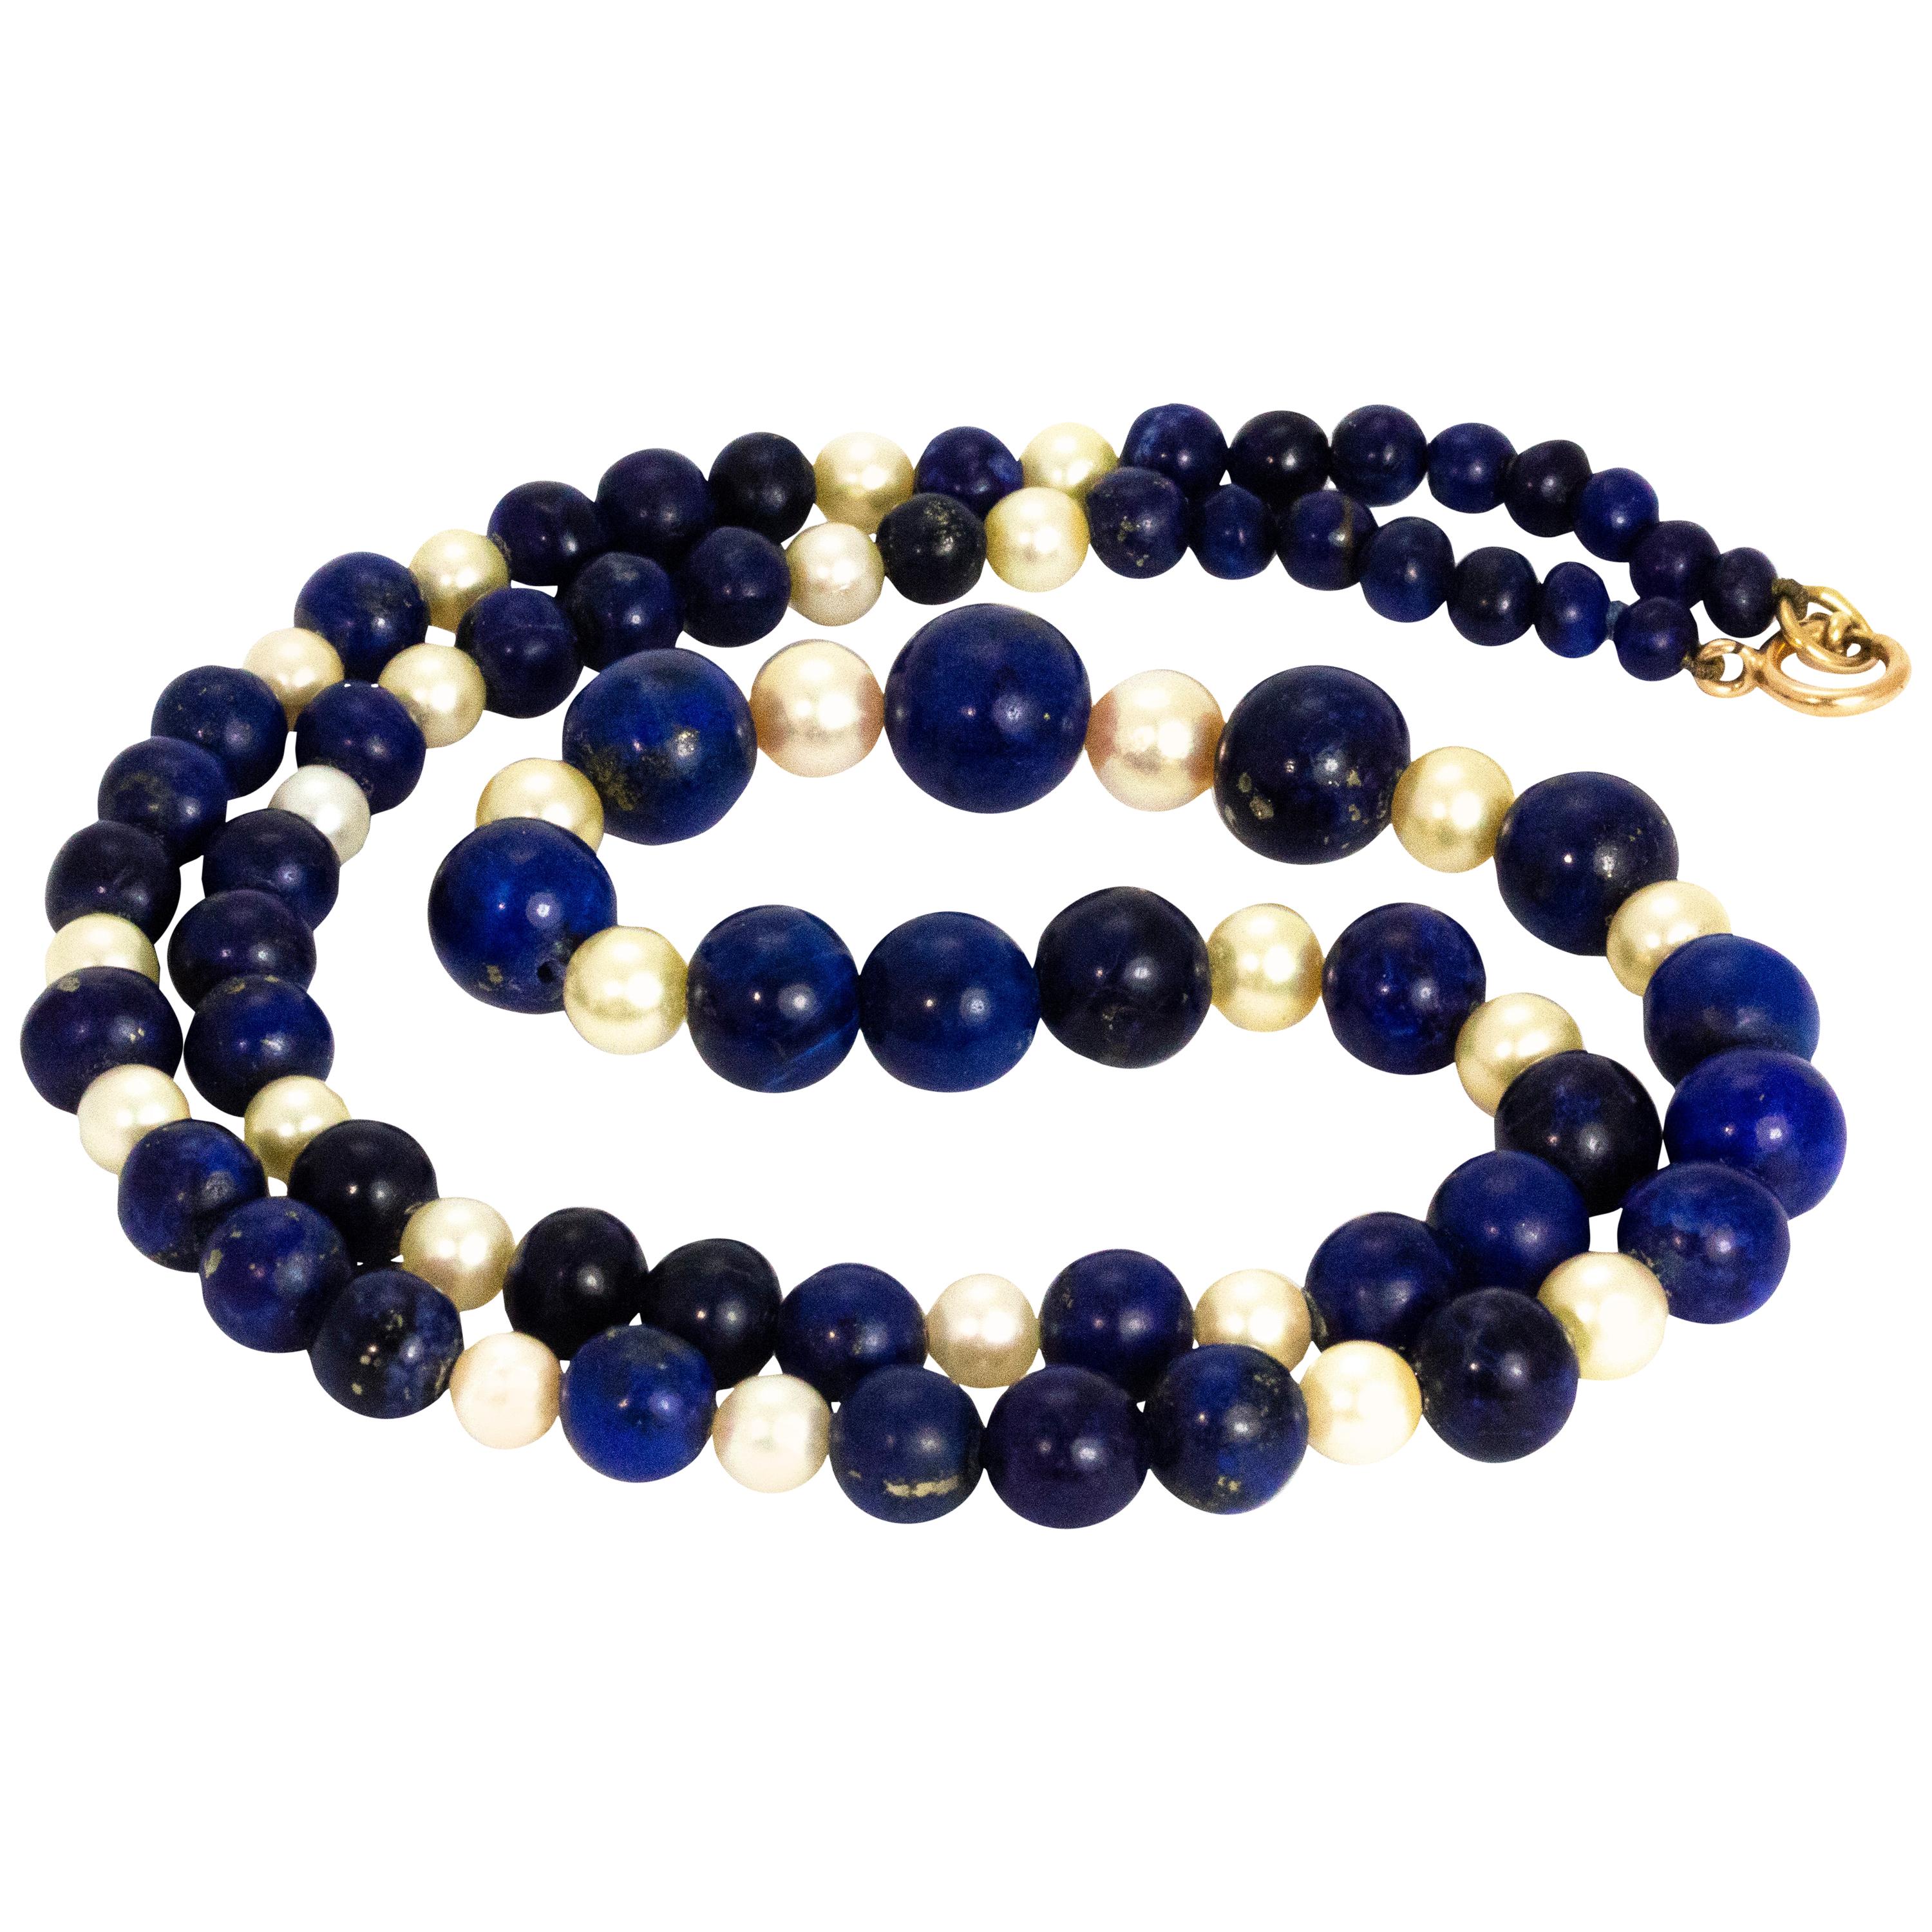 Vintage Lapis Lazuli and Pearl Beaded Necklace